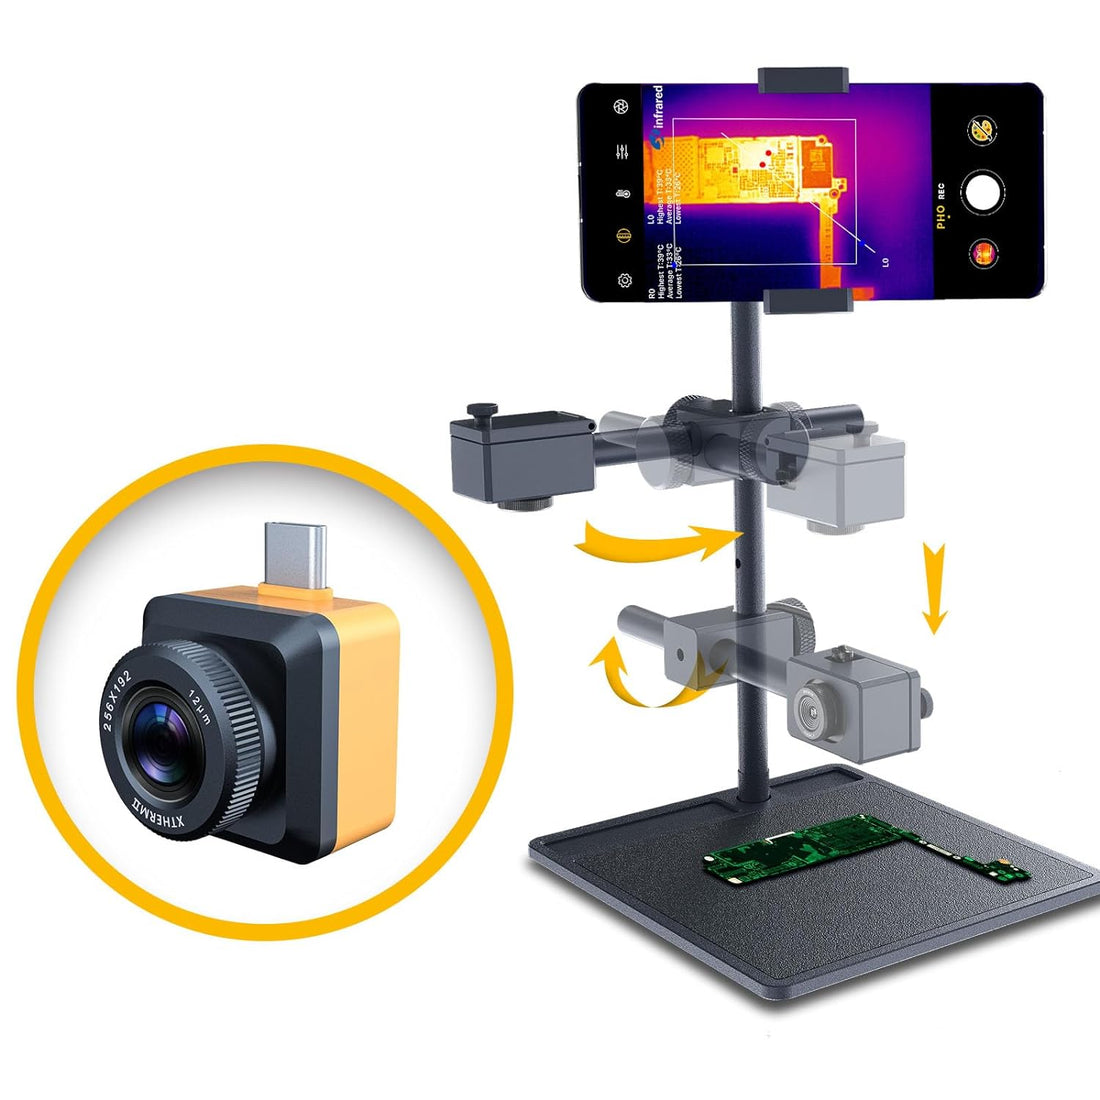 Xinfrared T2S Plus Thermal Camera for Android with 6D PCB Test Master, 8mm Adjustable Focus, 256 x 192 IR Resolution Thermal Imager for Cell Phone, Works for Smartphones and Tablets